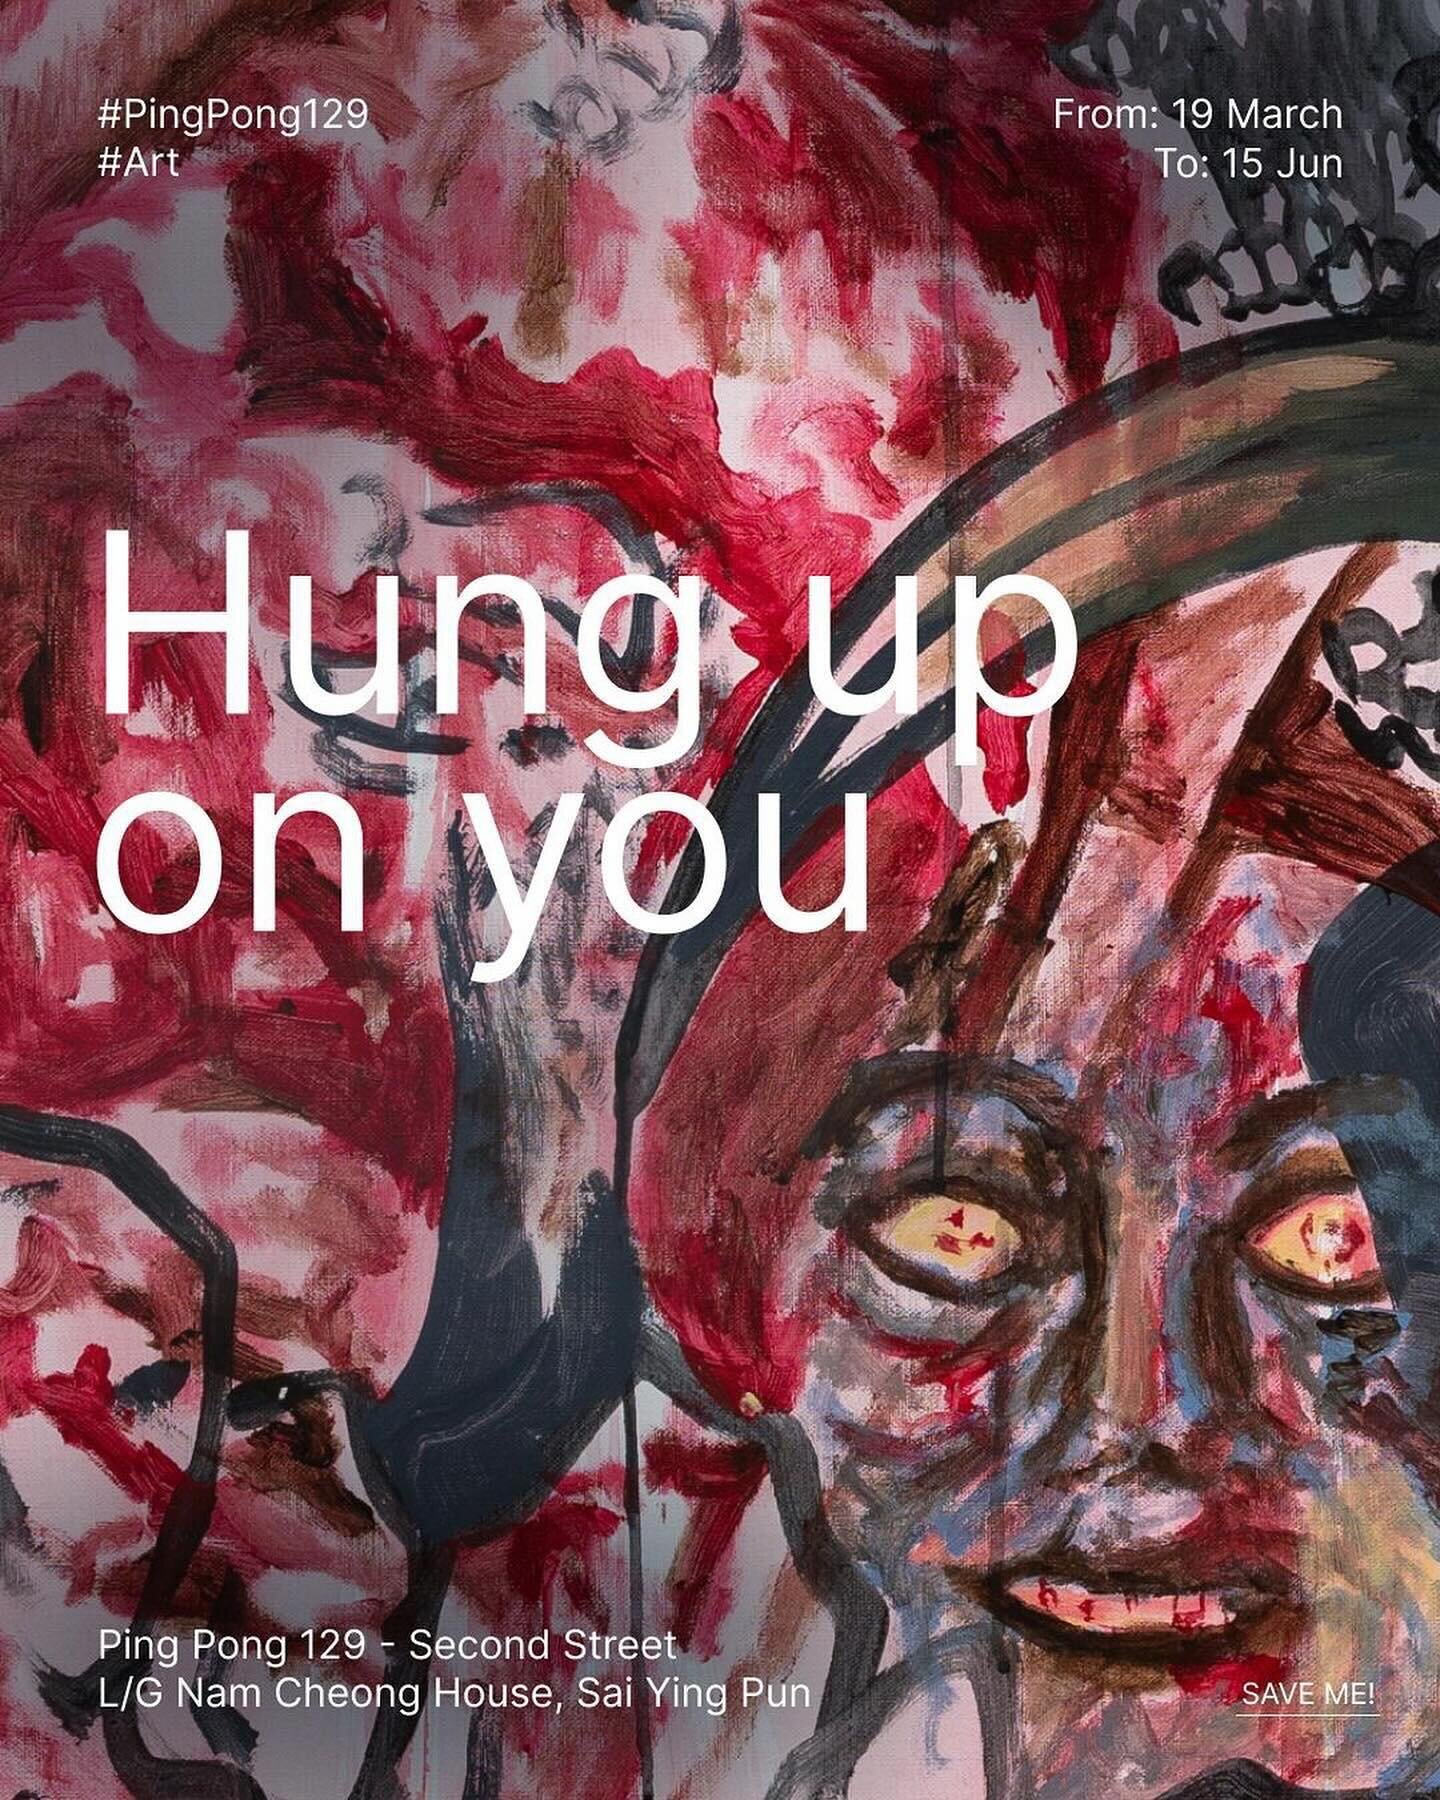 Opening this eve!!
@pingpong129 HUNG UP ON YOU

⇨ PING PONG 129 - GINTONER&Iacute;A 乒乓冰室

ART BASEL HONG KONG, 2024 
巴塞爾藝術展香港展會2024

⇨ Ping Pong 129 - Gintoner&iacute;a is pleased to present a selling exhibition of works by some of Hong Kong&rsquo;s 